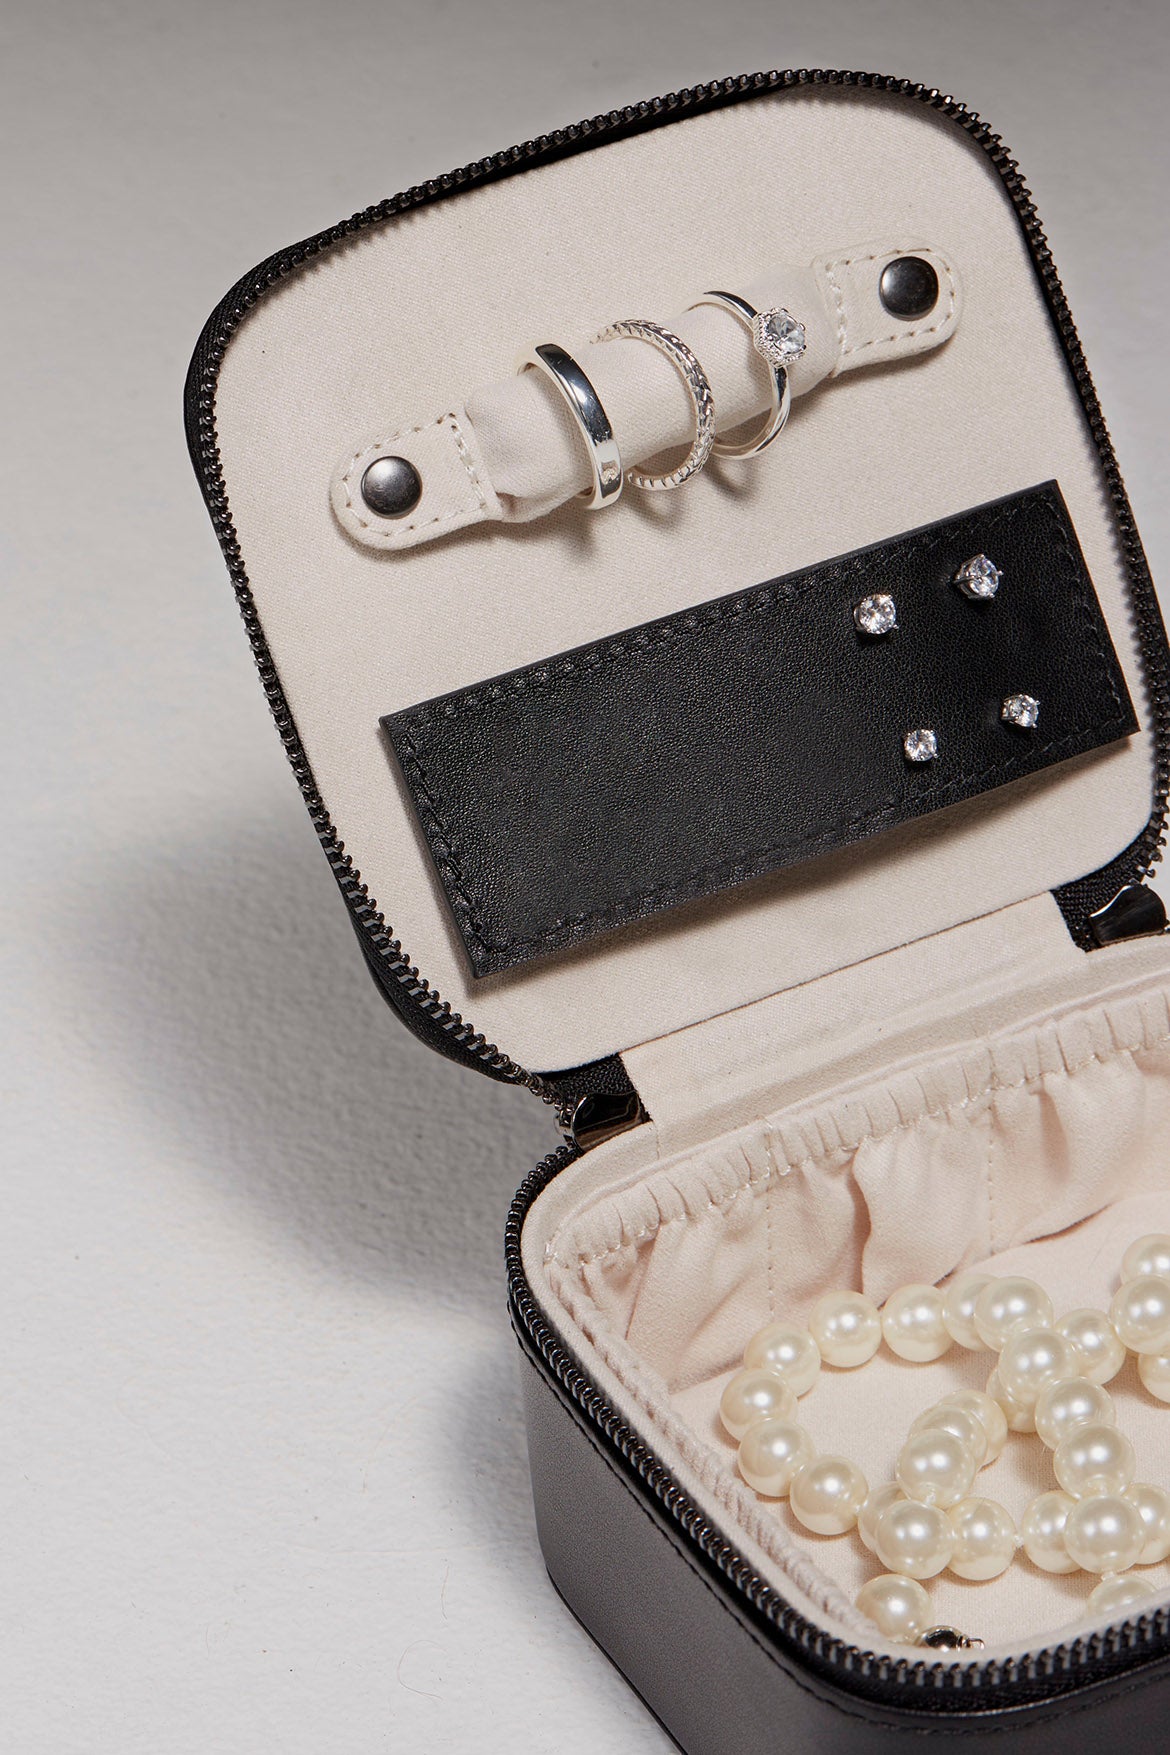 Jewelry case opened revealing rings, pearls, and earrings